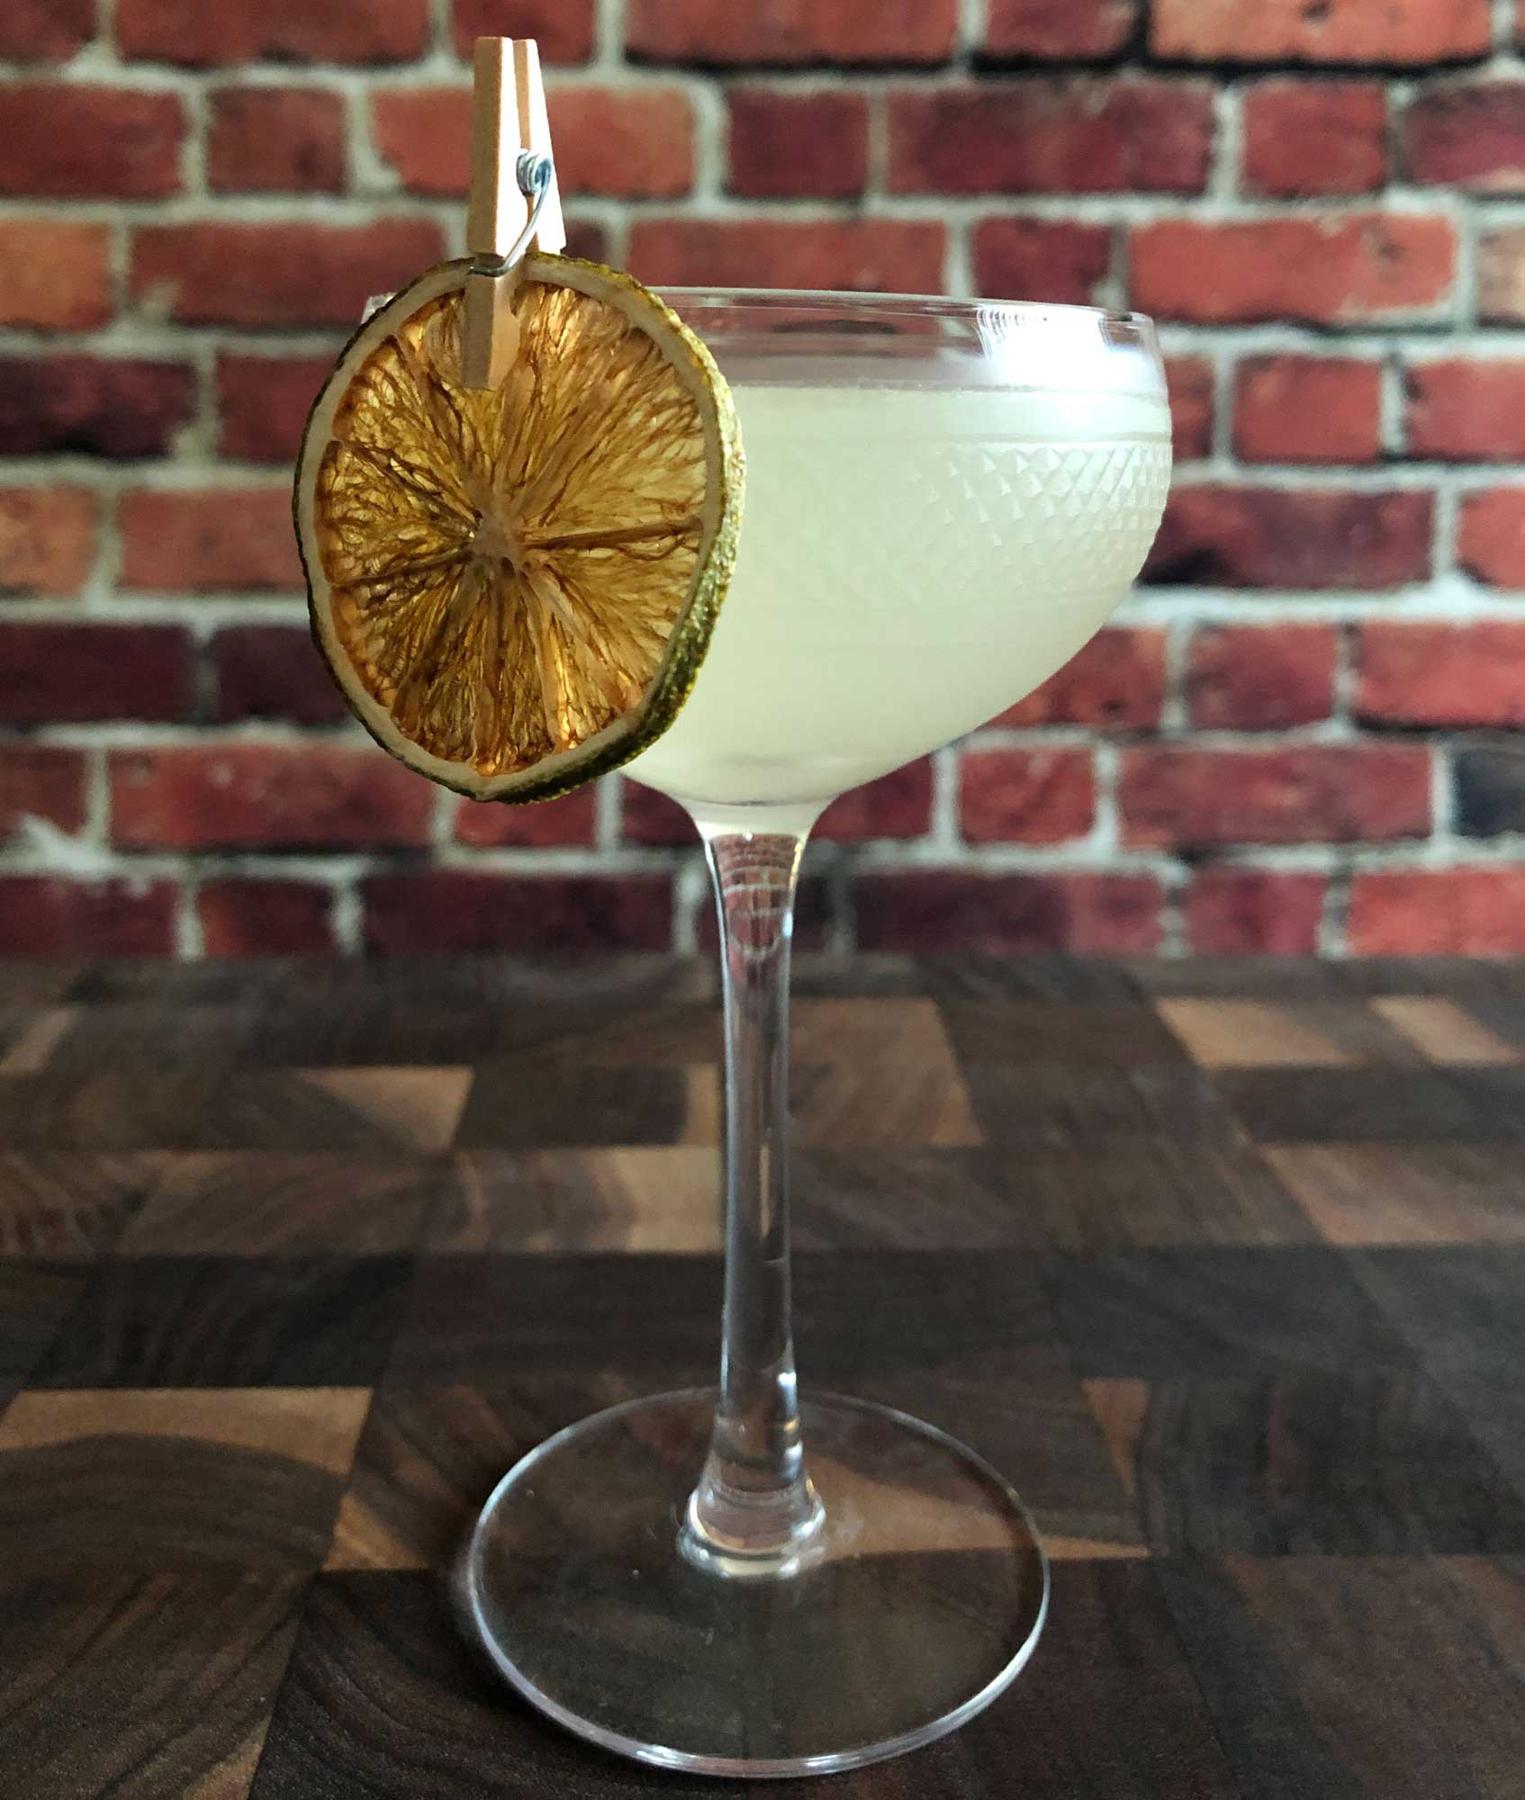 An example of the Katinka, the mixed drink (drink), by David Embury, The Fine Art of Mixing Drinks, featuring vodka, Rothman & Winter Orchard Apricot Liqueur, and lime juice; photo by Lee Edwards